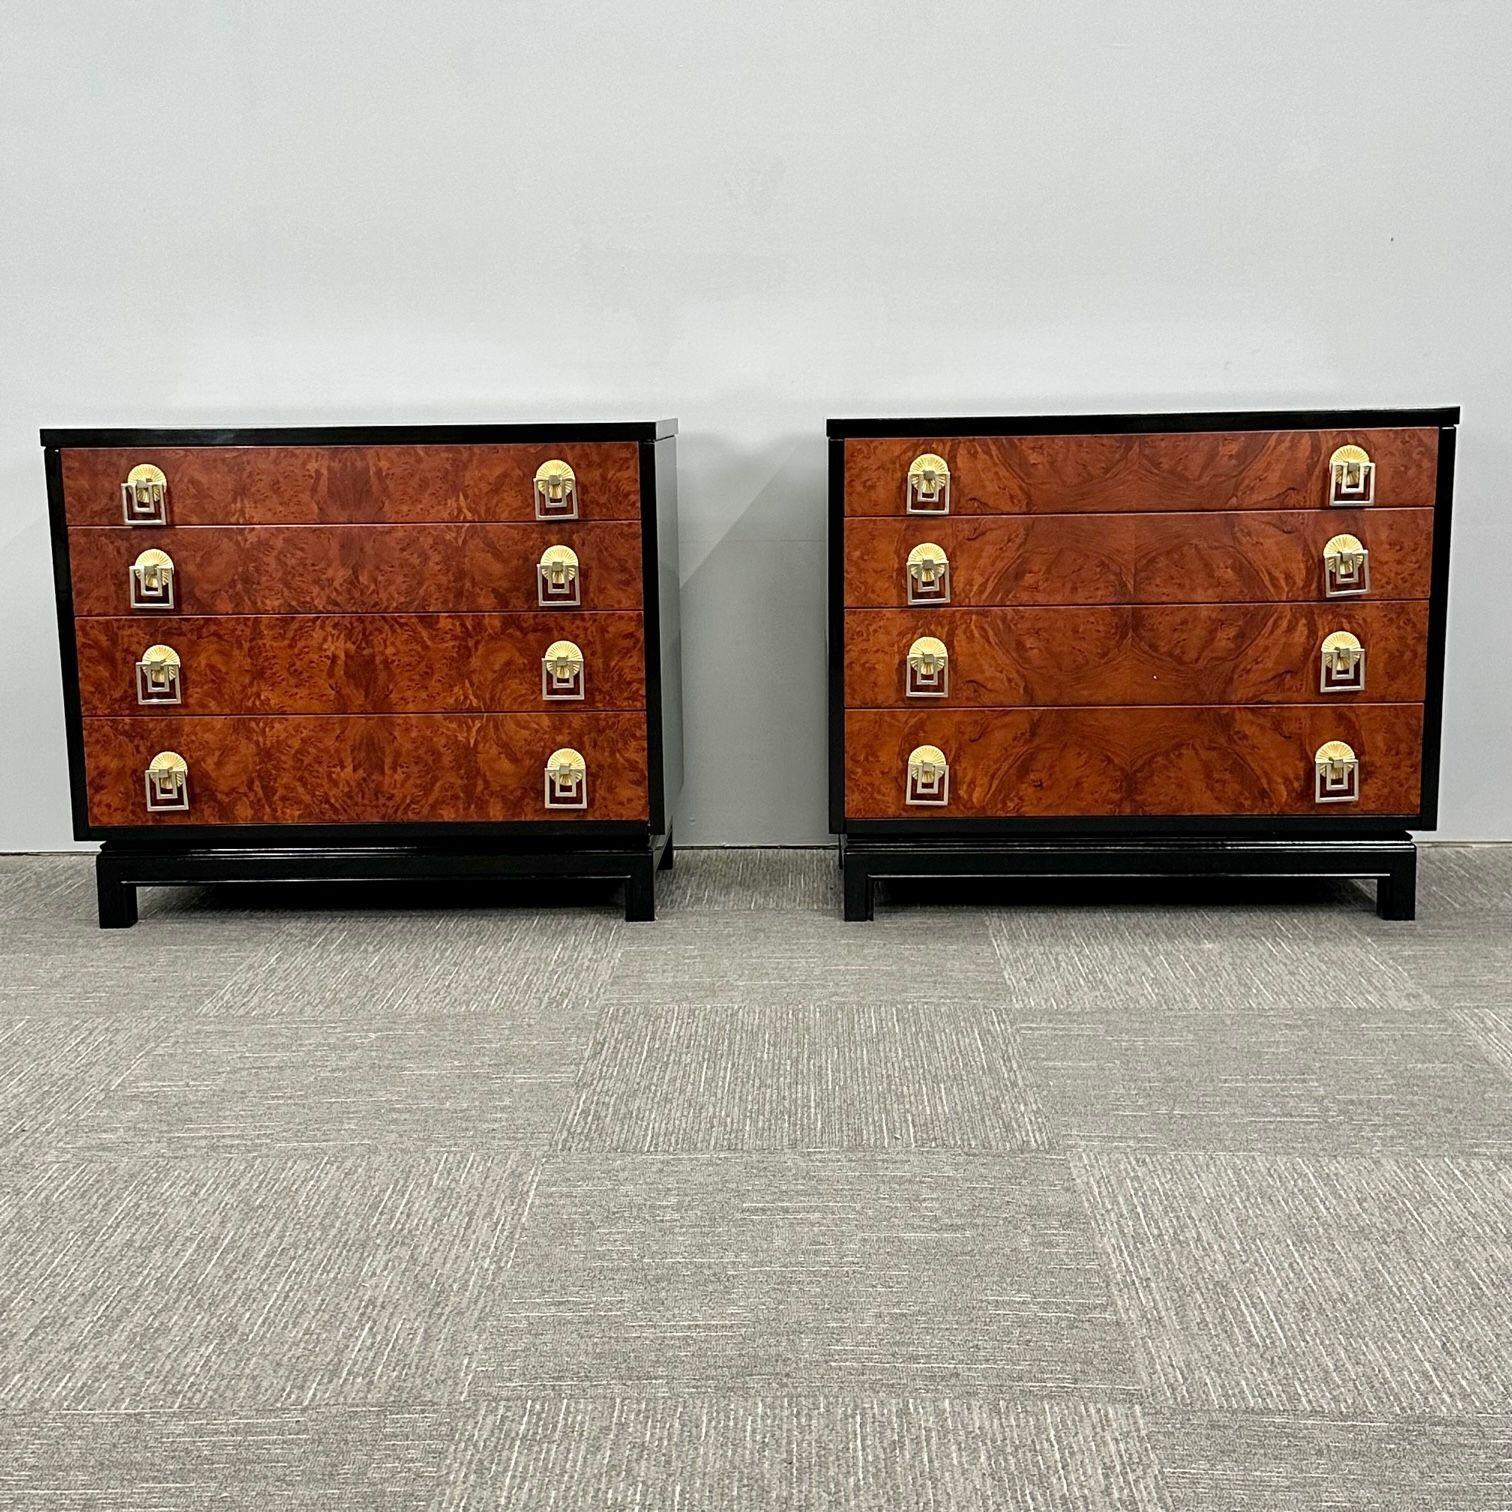 Italian Mid-Century Modern Renzo Retulli Style Chests / Commodes / Nightstands
Pair of Mid-Century Modern Commodes, Custom Made to Order. An absolutely stunning pair of bedside cabinets or chests having bird’s-eye Maple drawer fronts with Art Deco